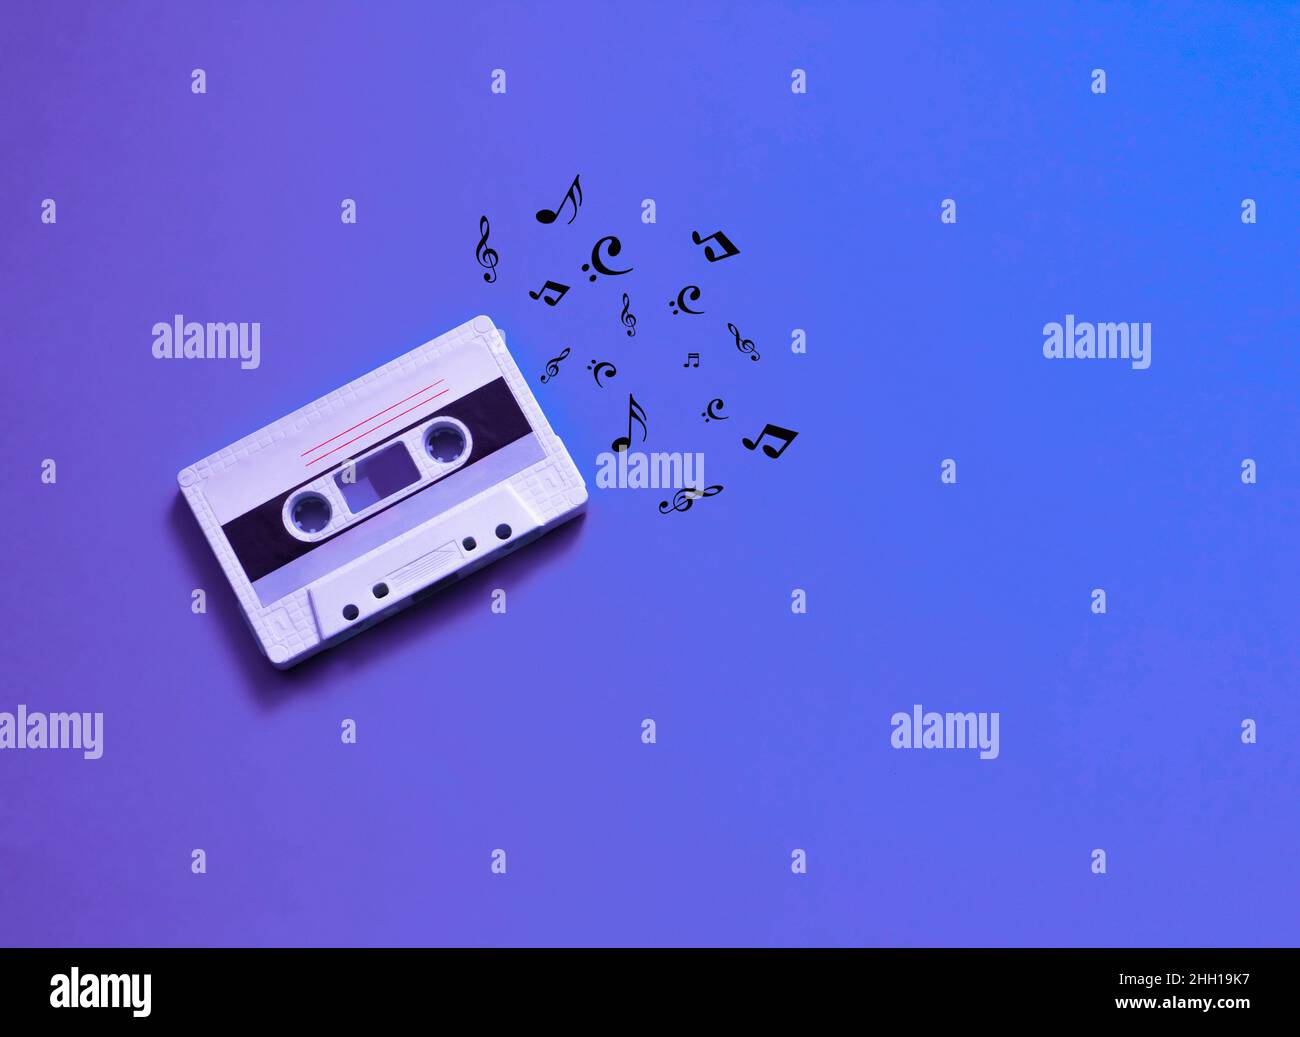 Audio cassette. Vintage white audio cassette on a colored background with notes. 80s style. retro concept Stock Photo